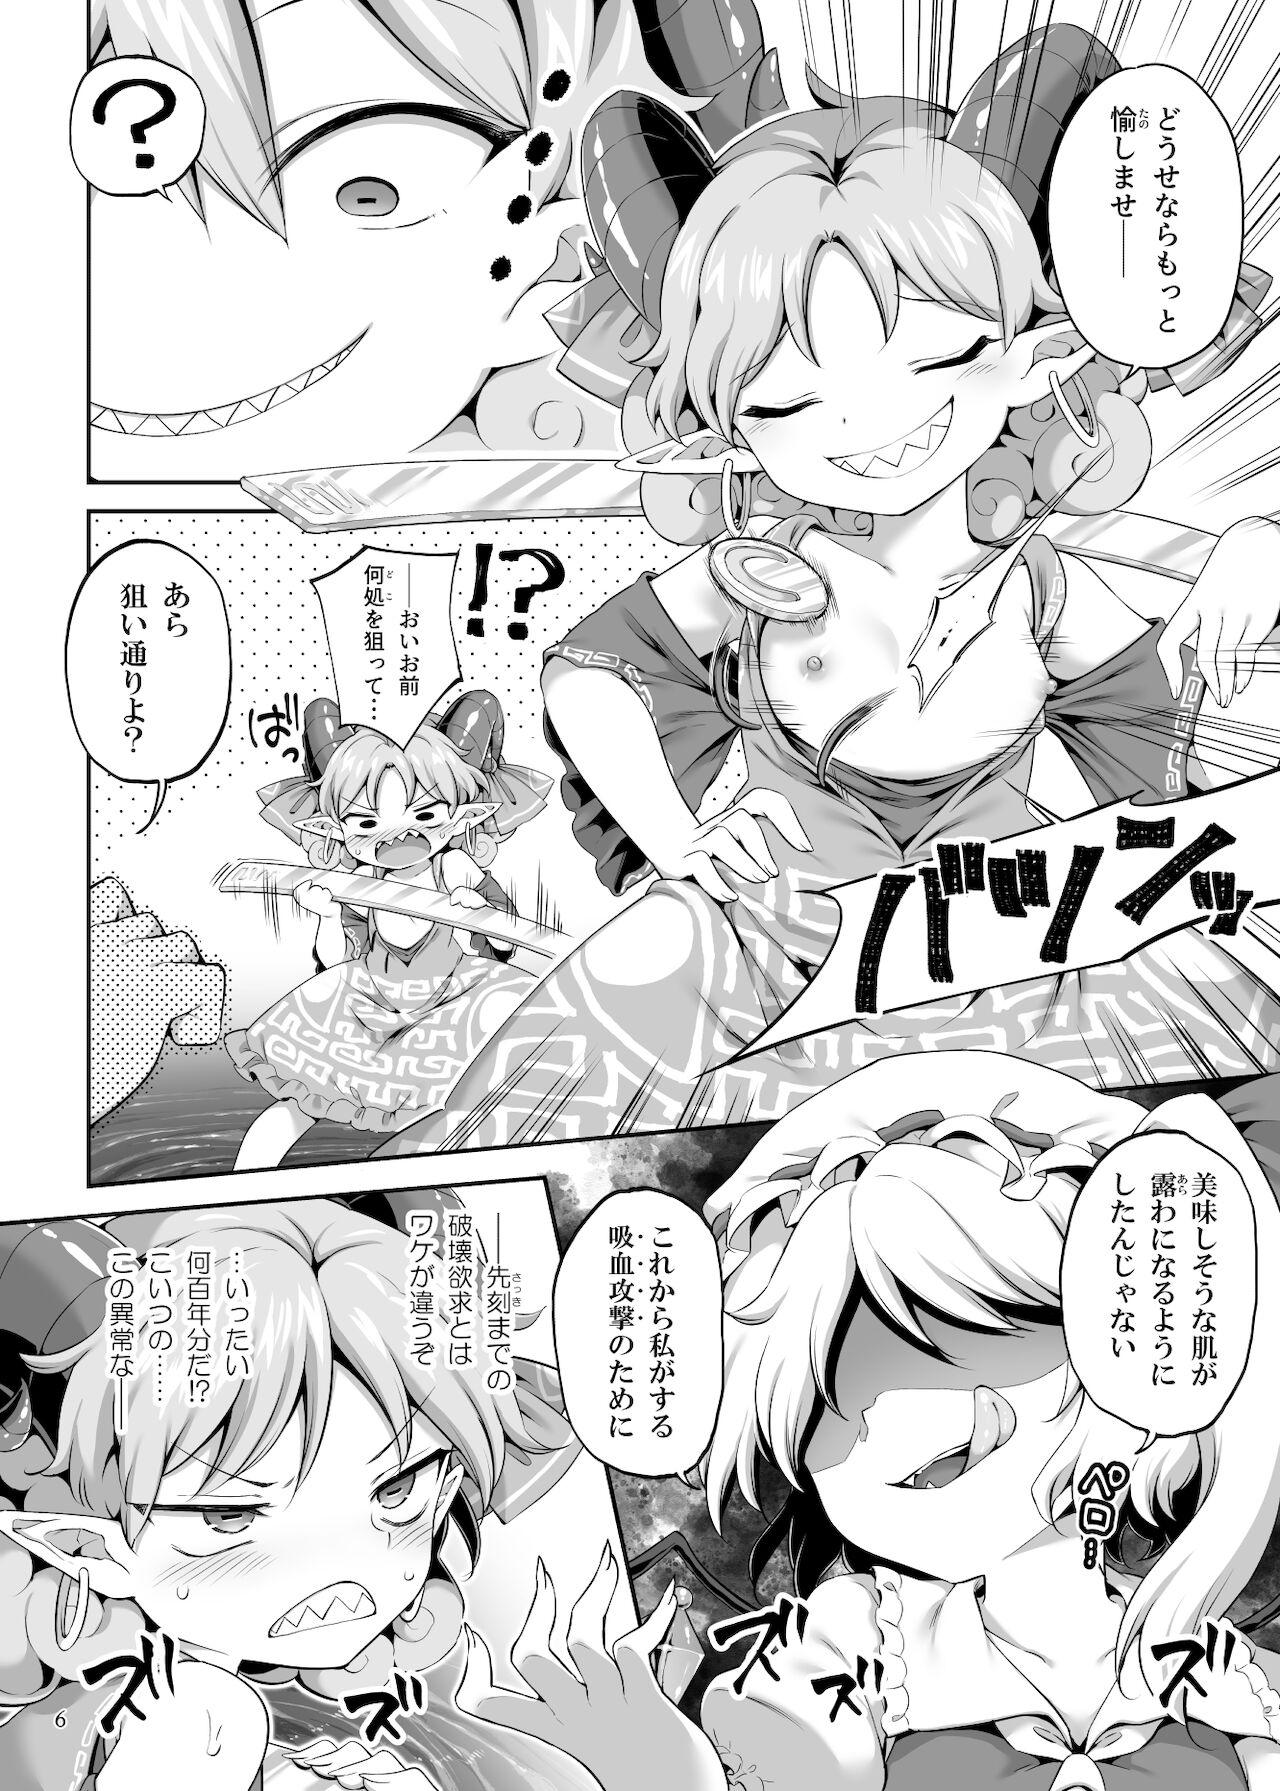 Camporn 吸われて駄目なら吸ってみろ! - Touhou project Fishnets - Page 6